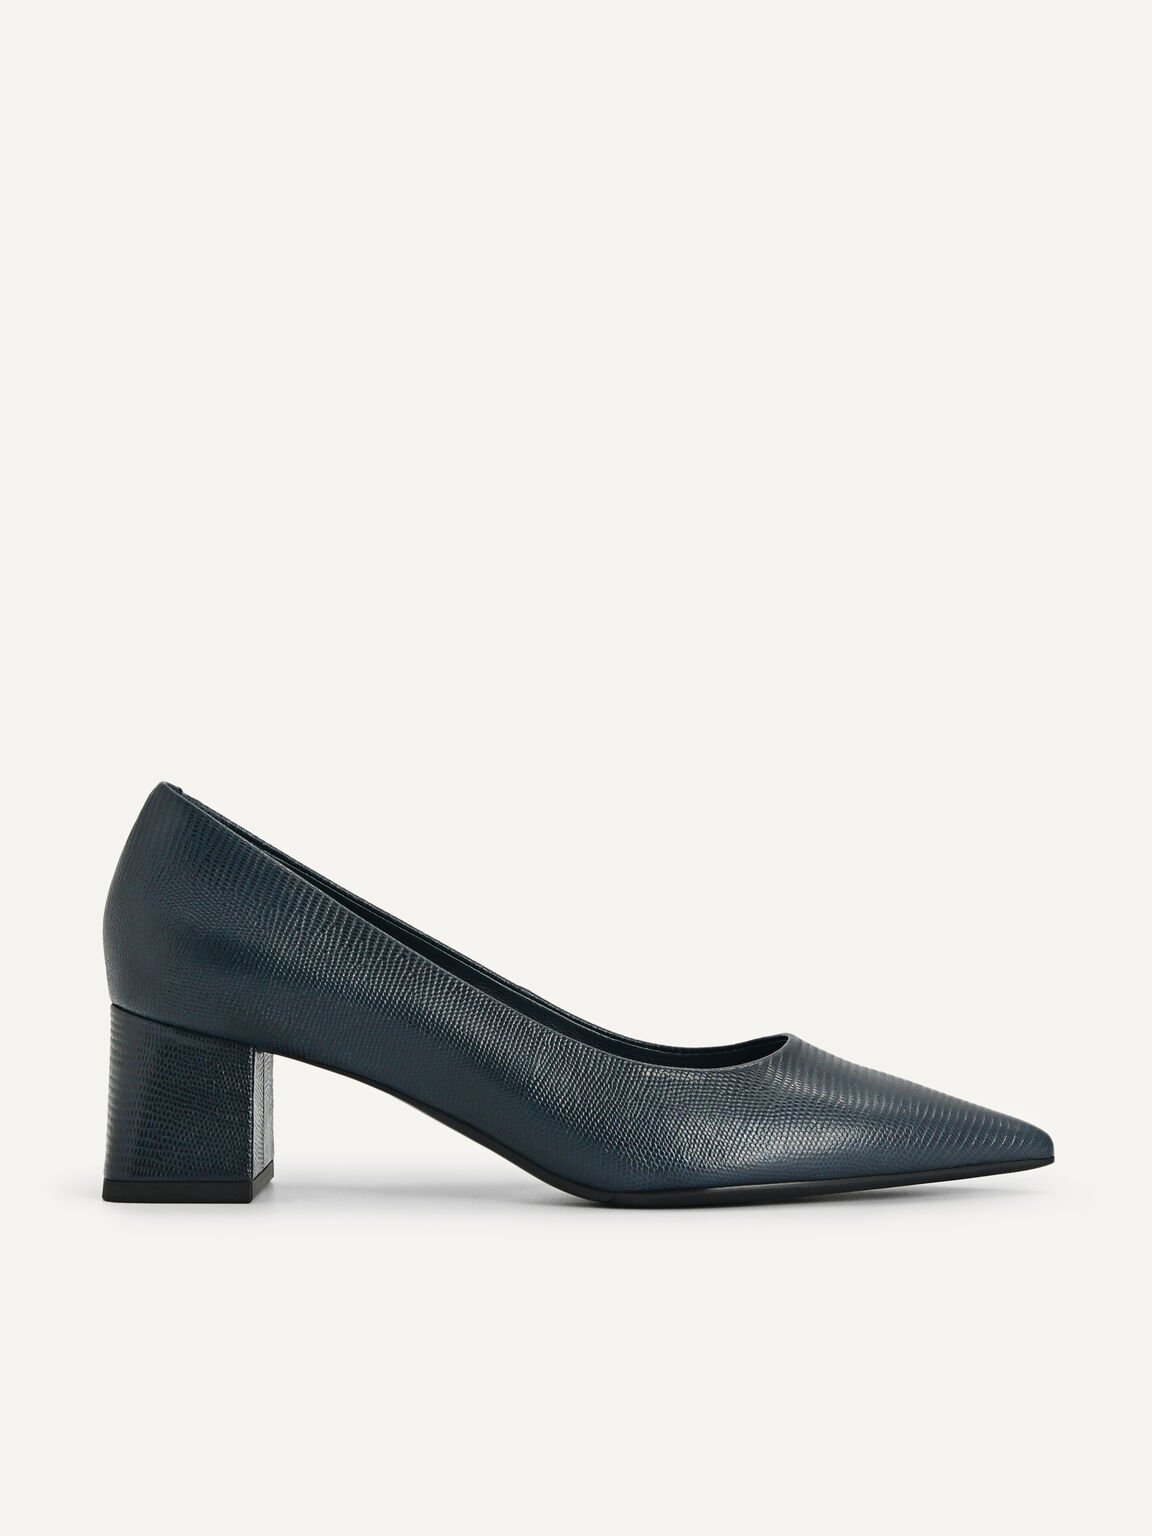 Lizard-Effect Leather Pointed Toe Pumps, Navy